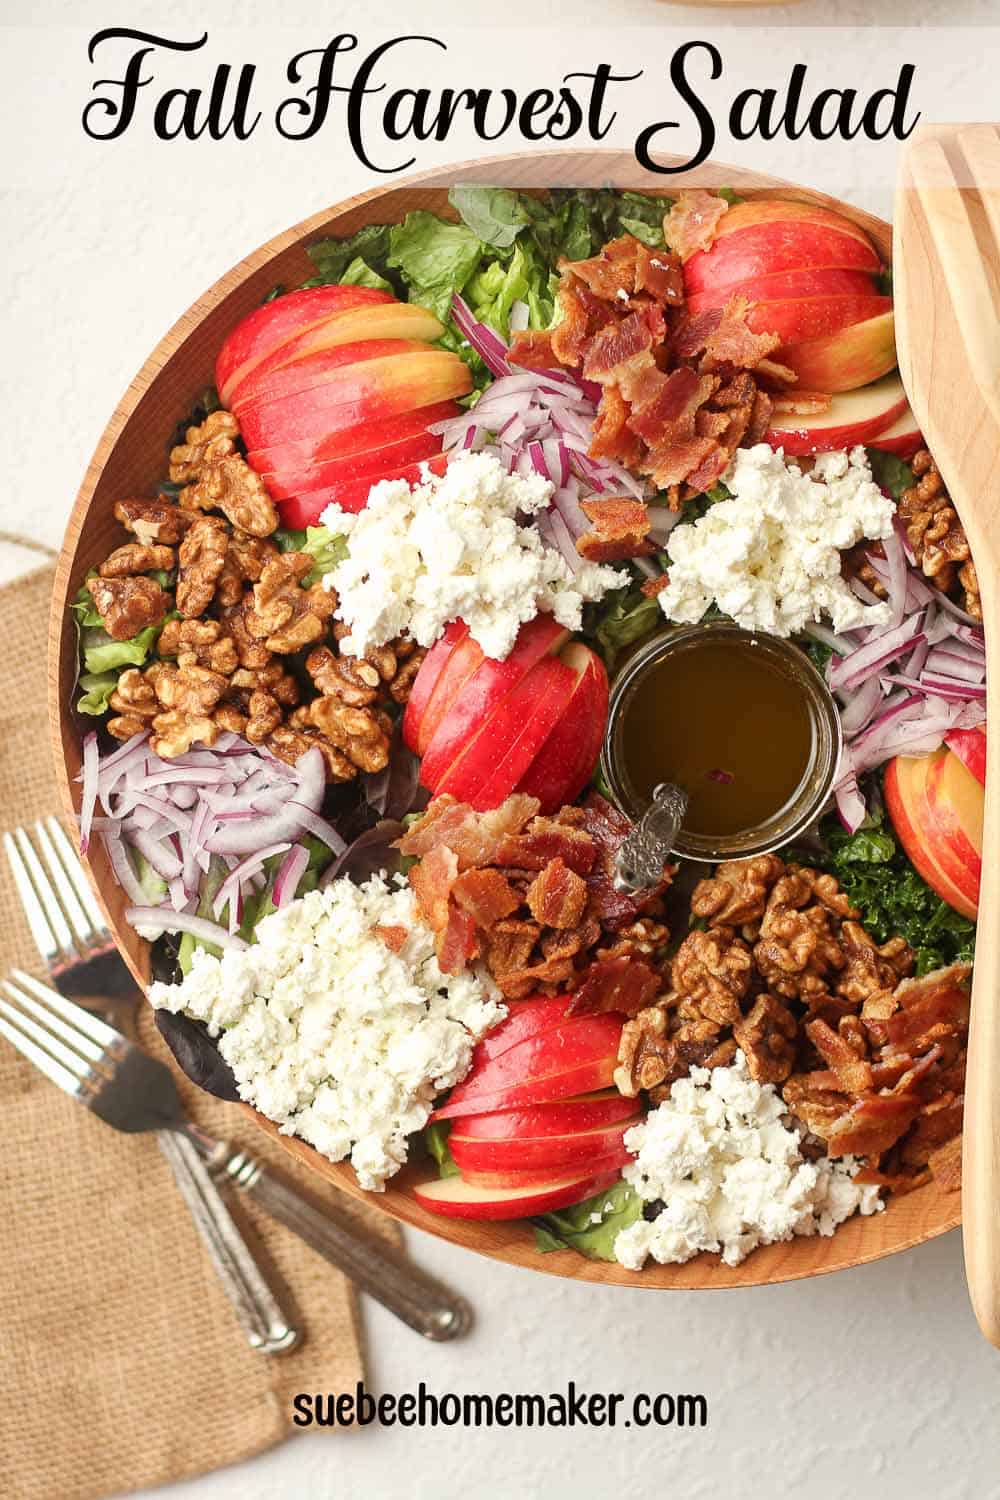 Overhead view of a wooden bowl of the Fall Harvest Salad with Honey Balsamic Dressing.